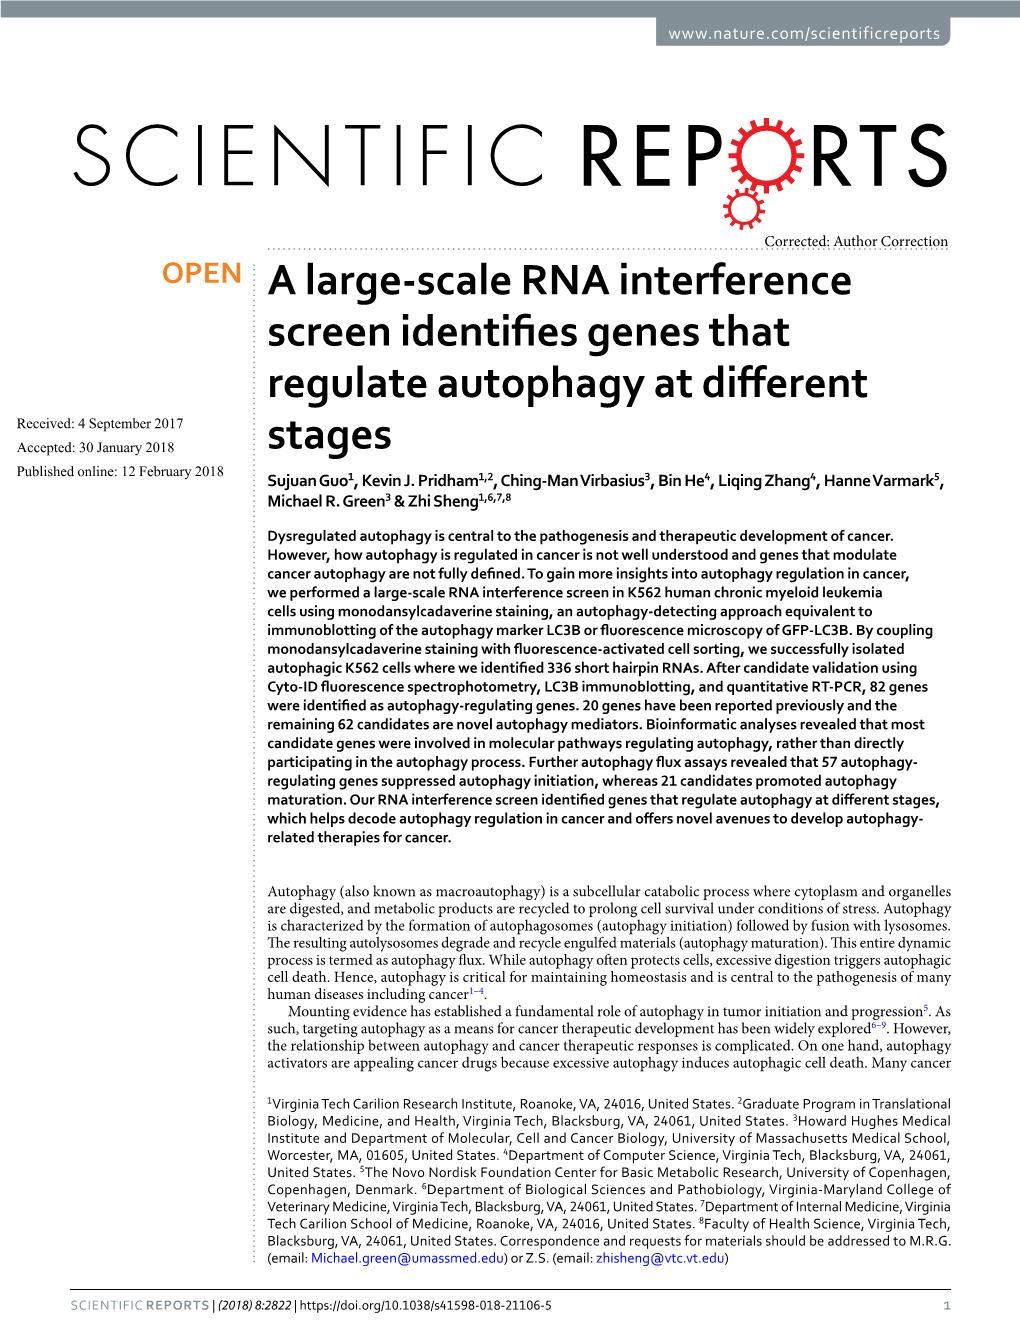 A Large-Scale RNA Interference Screen Identifies Genes That